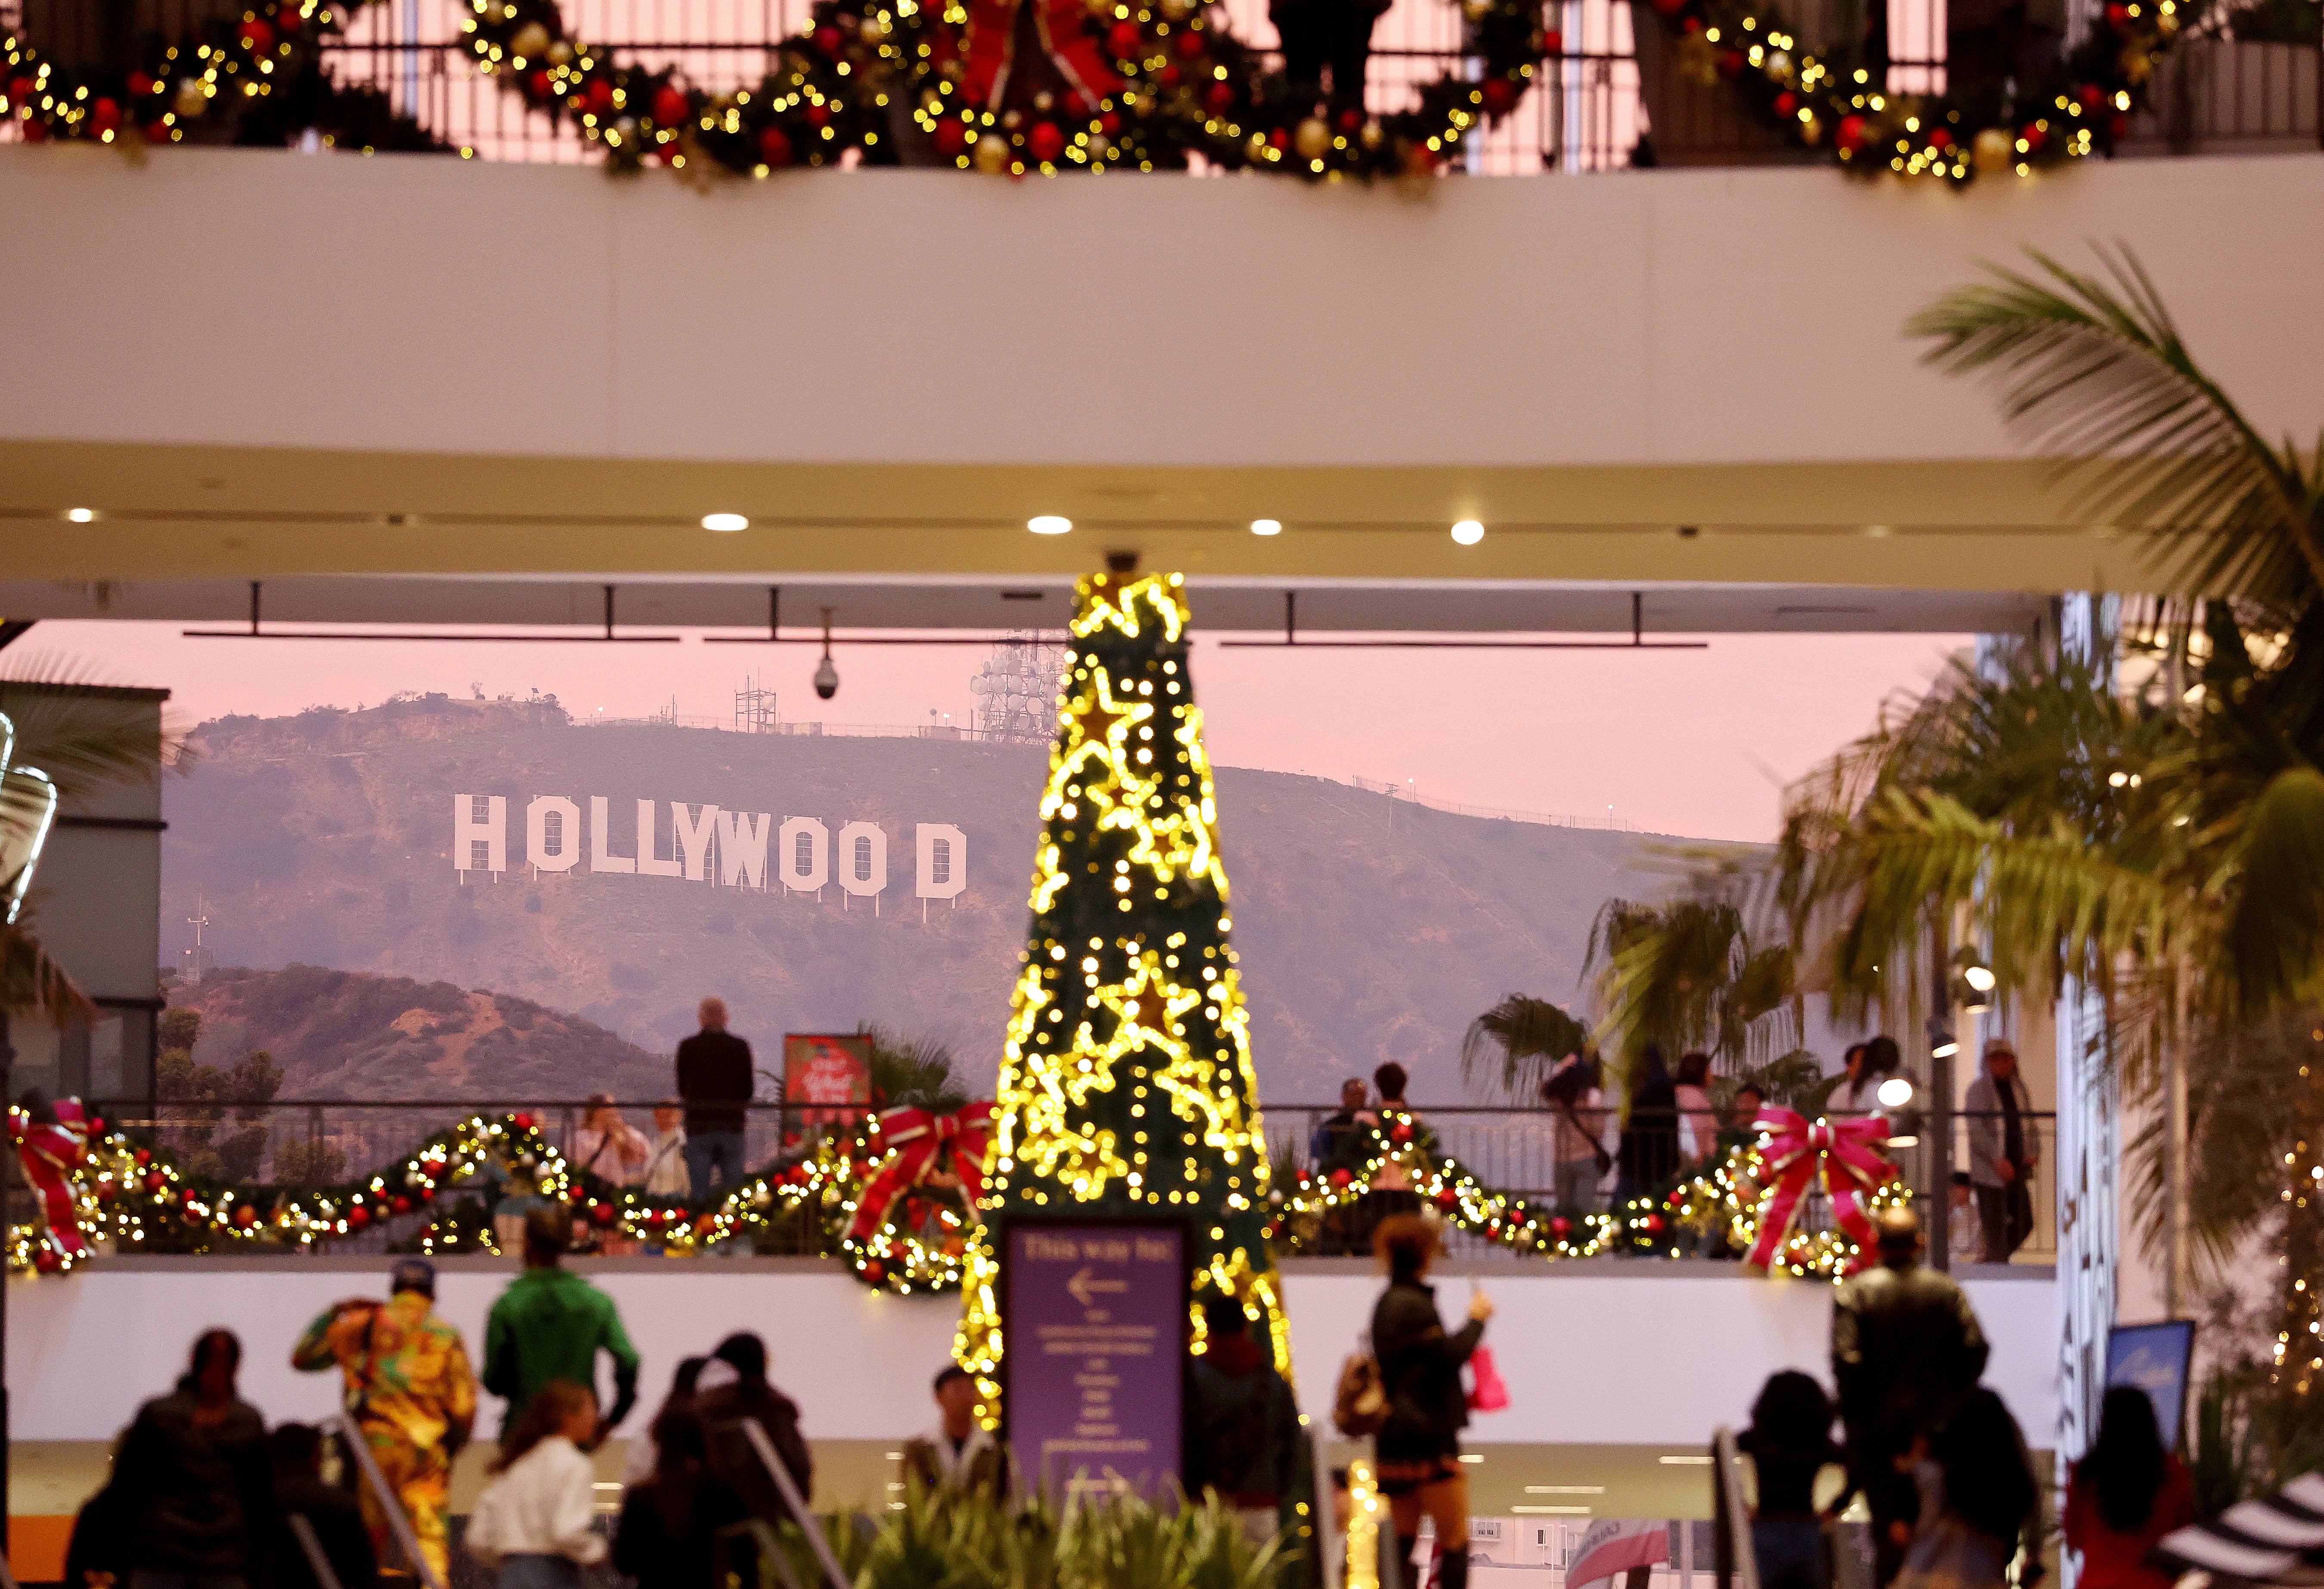 A busy Hollywood shopping centre in Los Angeles, California on December 22, 2022 | Source: Getty Images